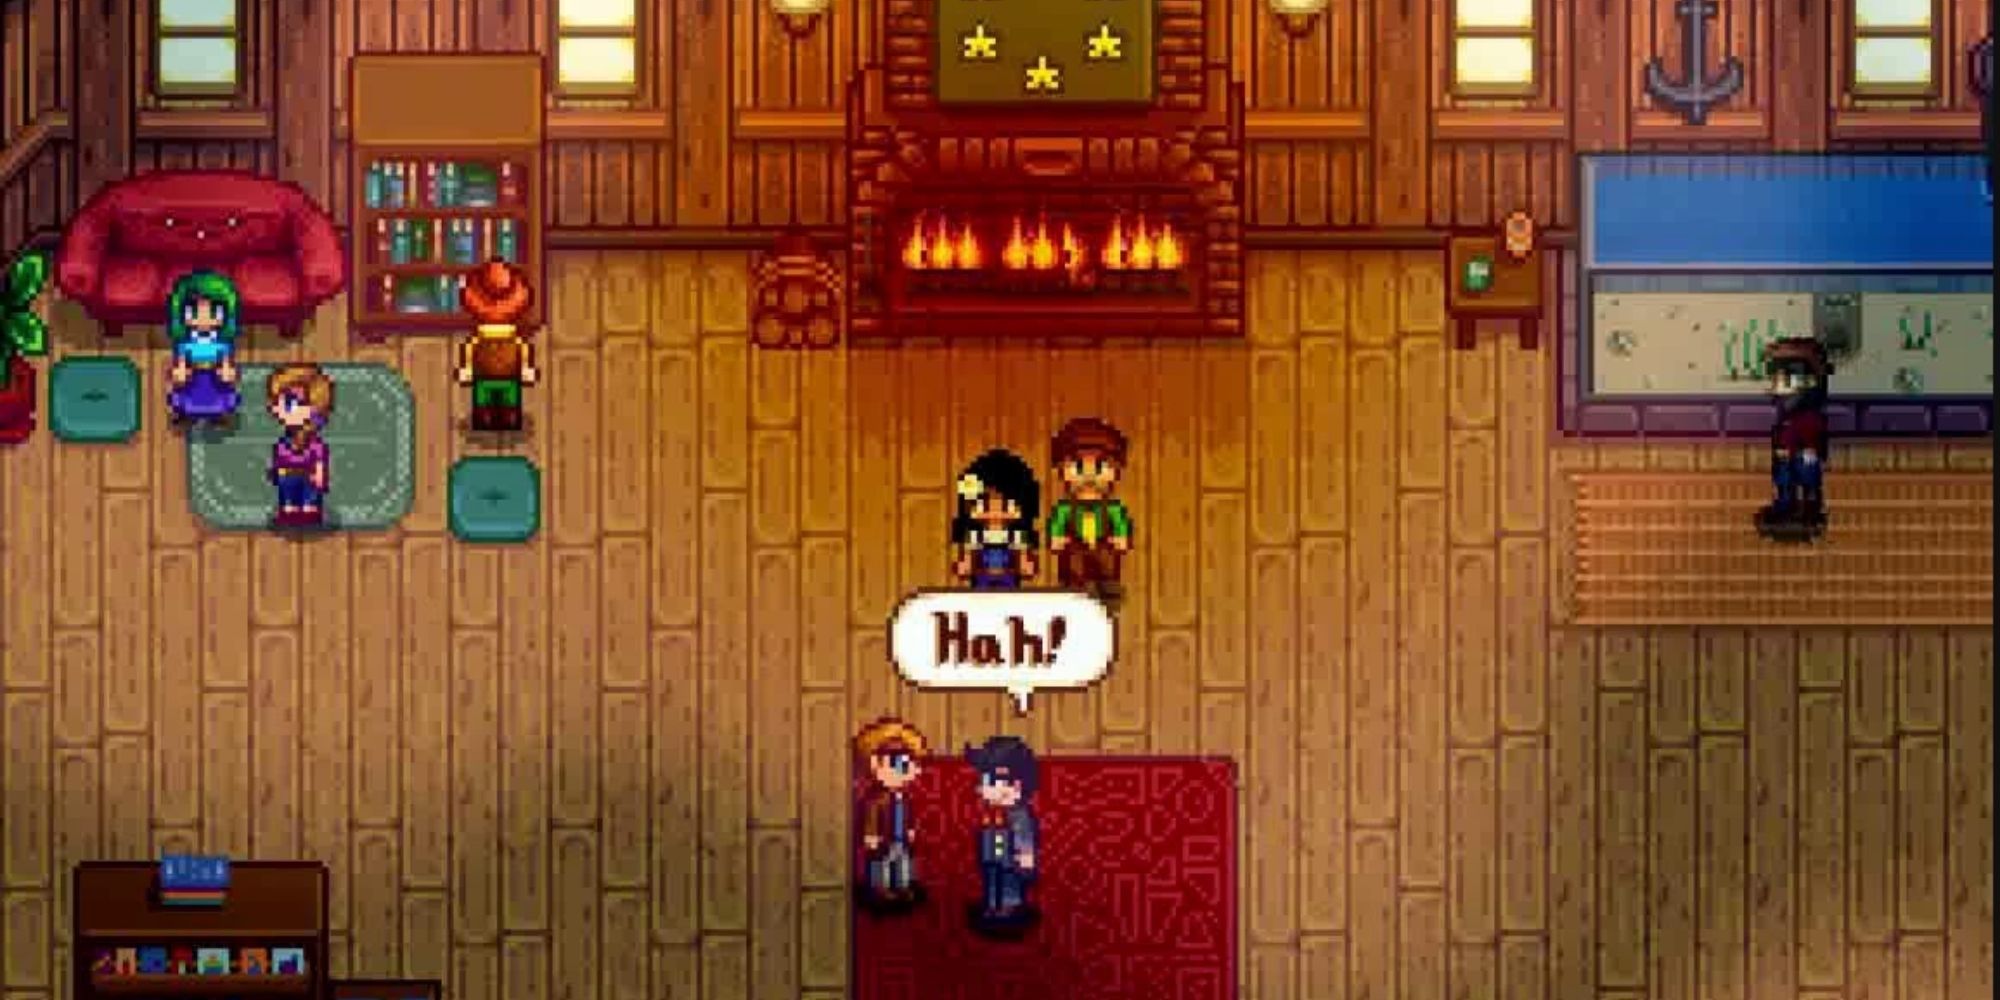 Morris confronting Pierre and some of the other townsfolk in the community center